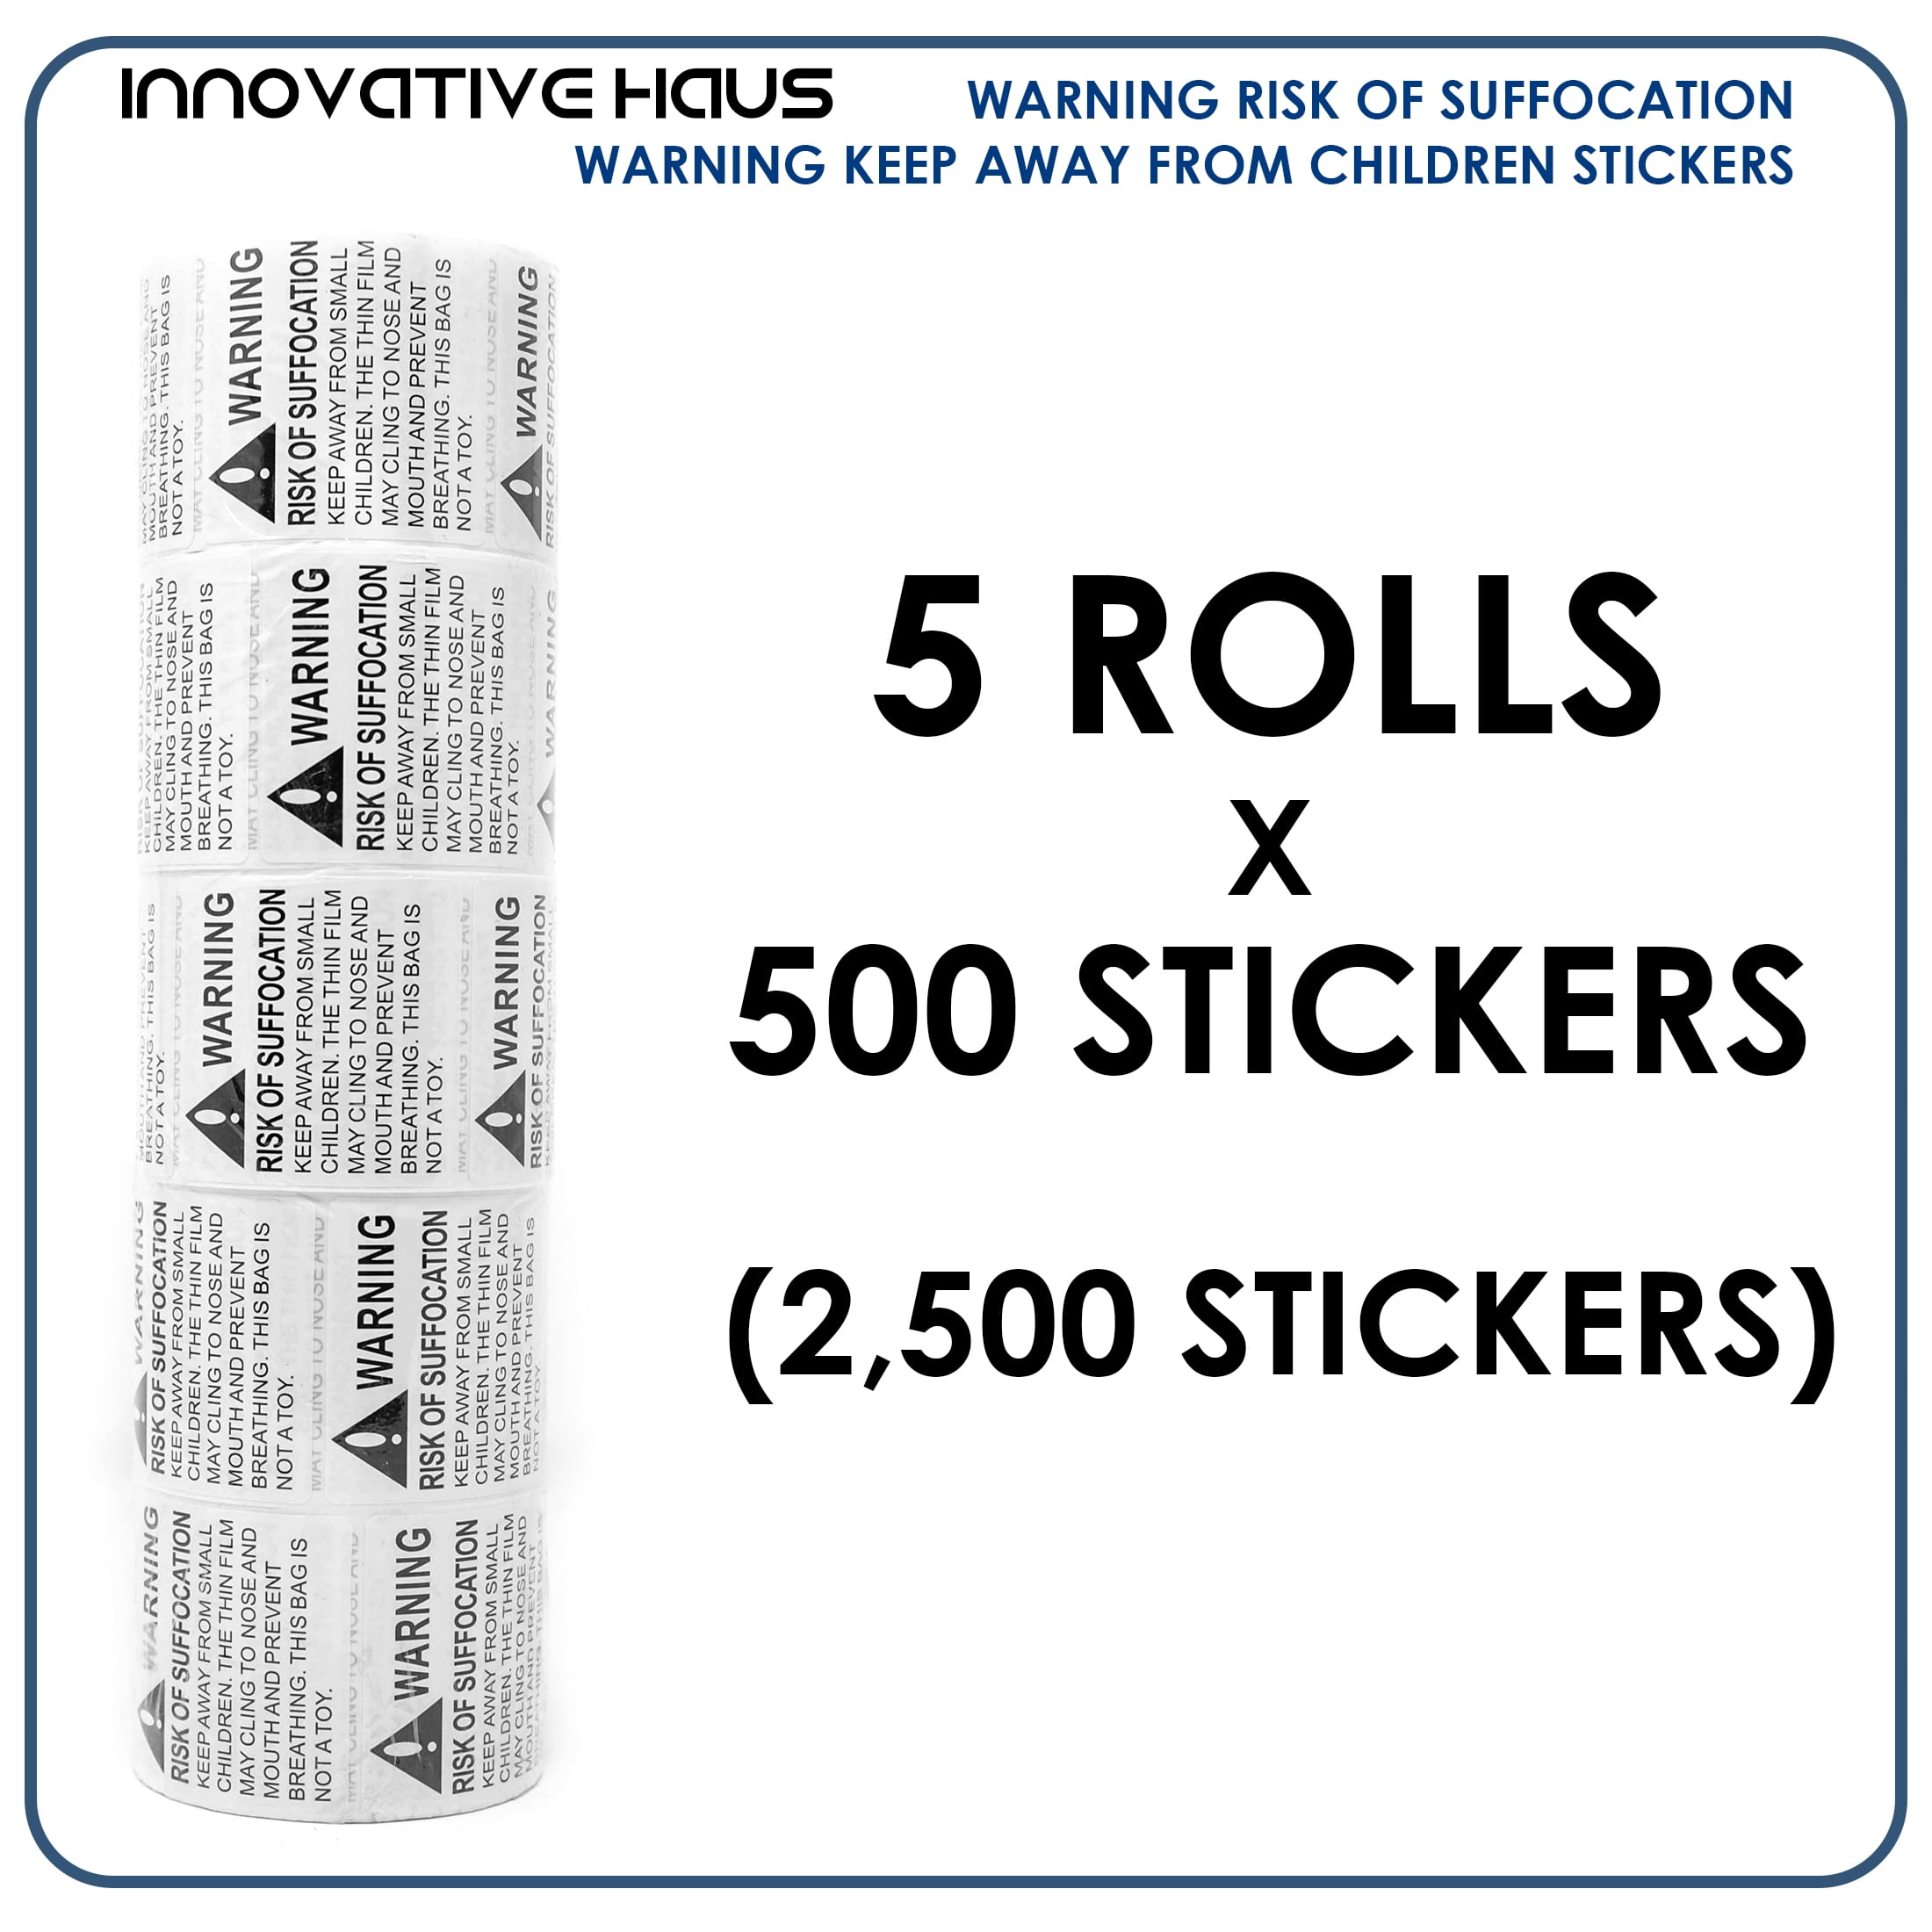 2" by 2" 500 ct White and Black "Warning" Suffocation Hazard Labels Stickers